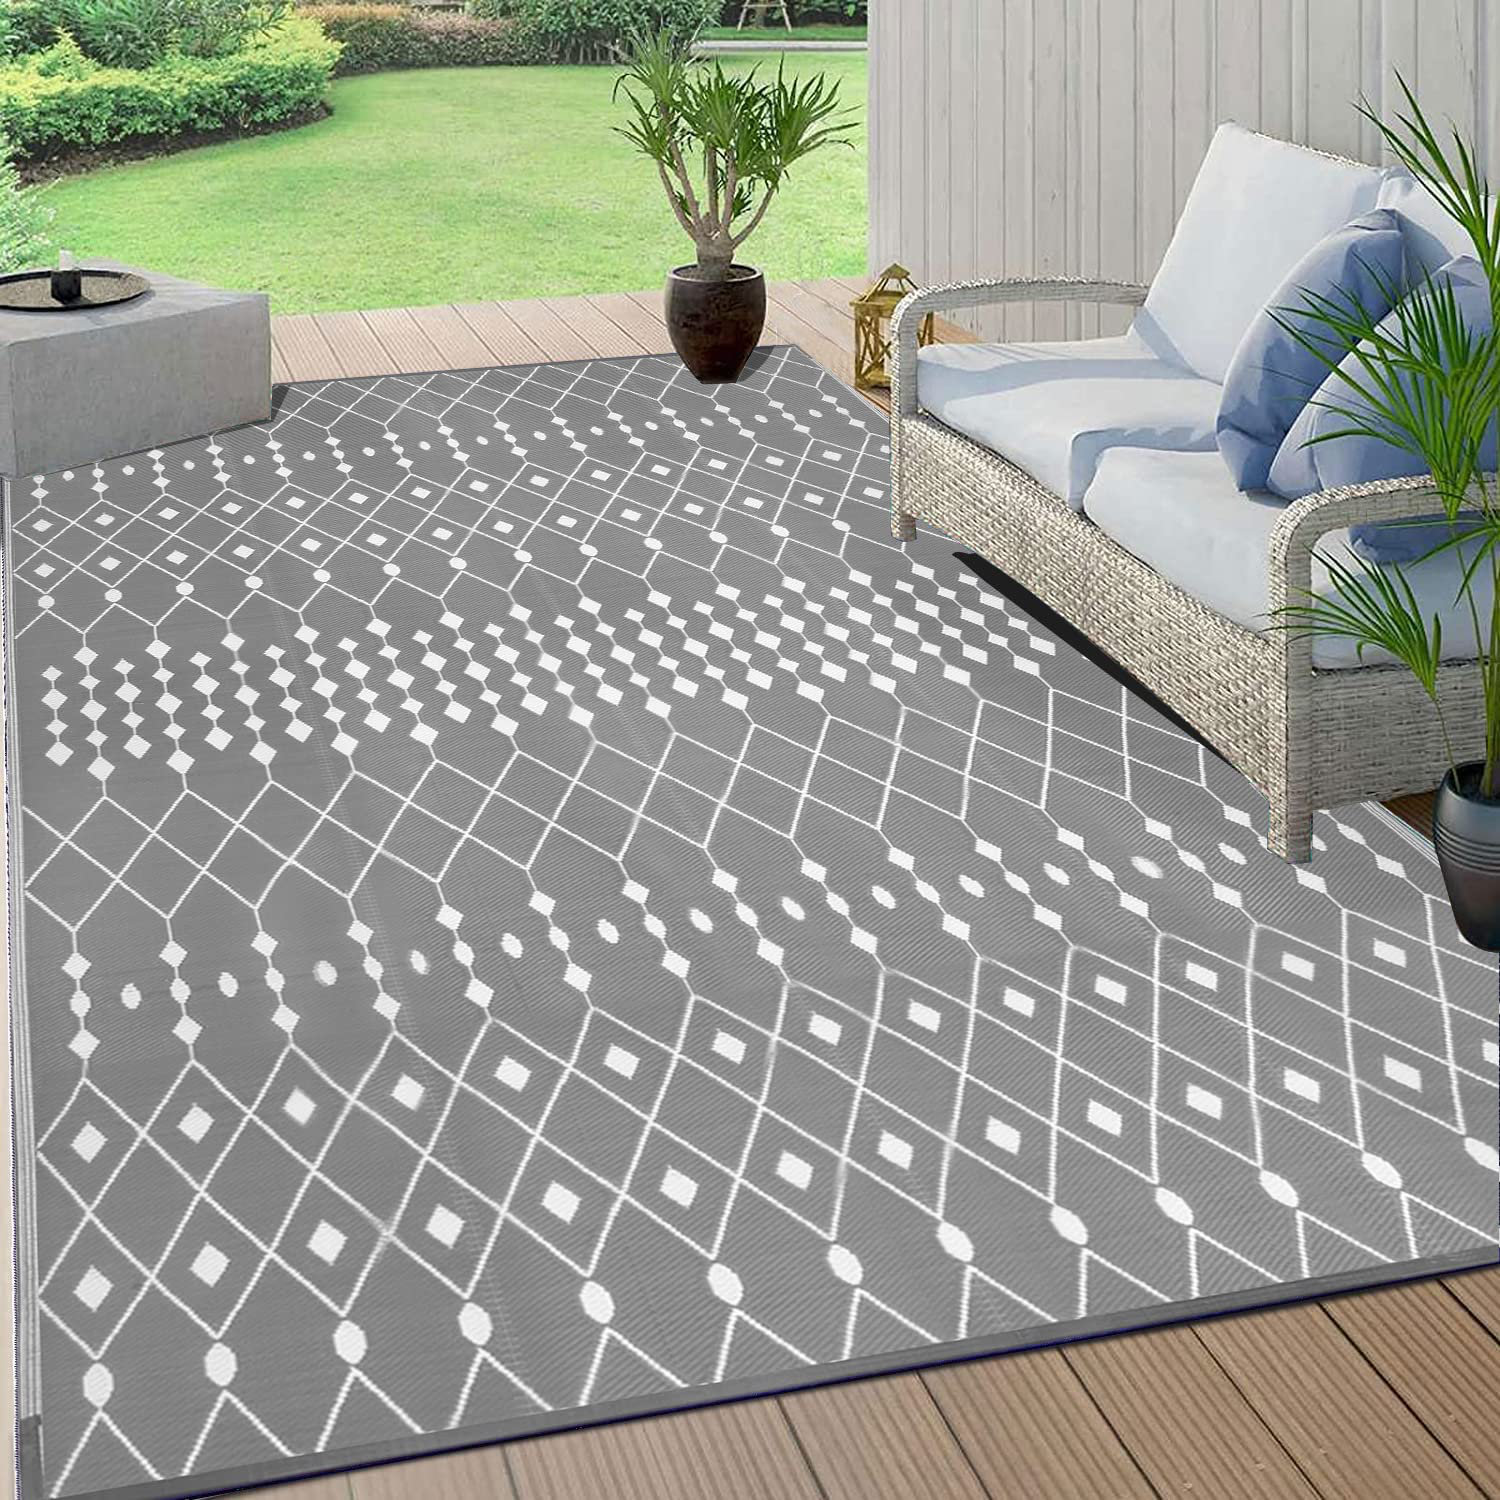 Foundry Select Sumiye Outdoor Rug for Patio Clearance, Waterproof